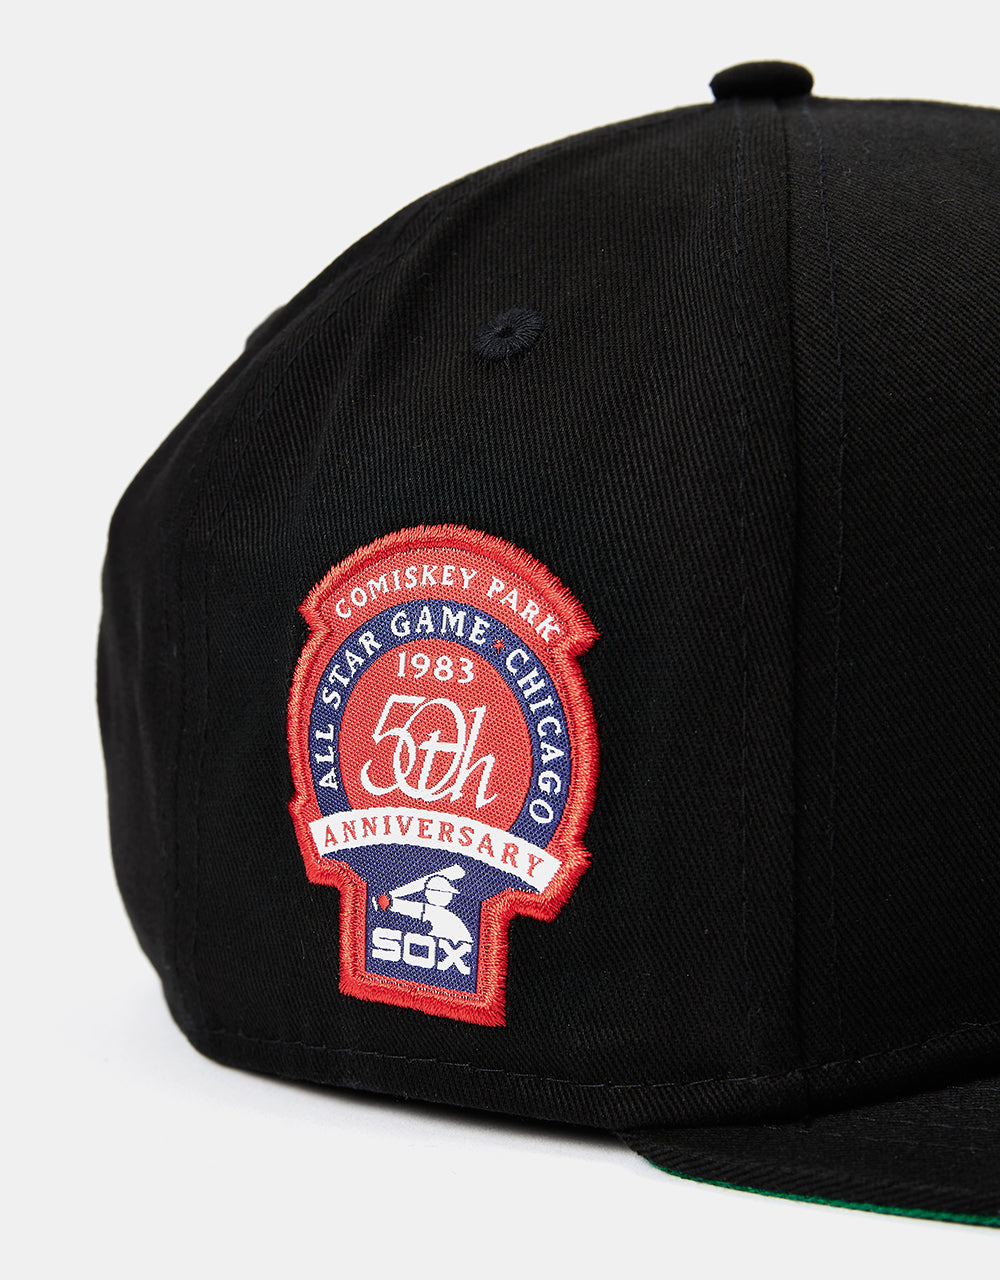 New Era 9Fifty® Chicago White Sox Team Side Patch Cap  - Black/White